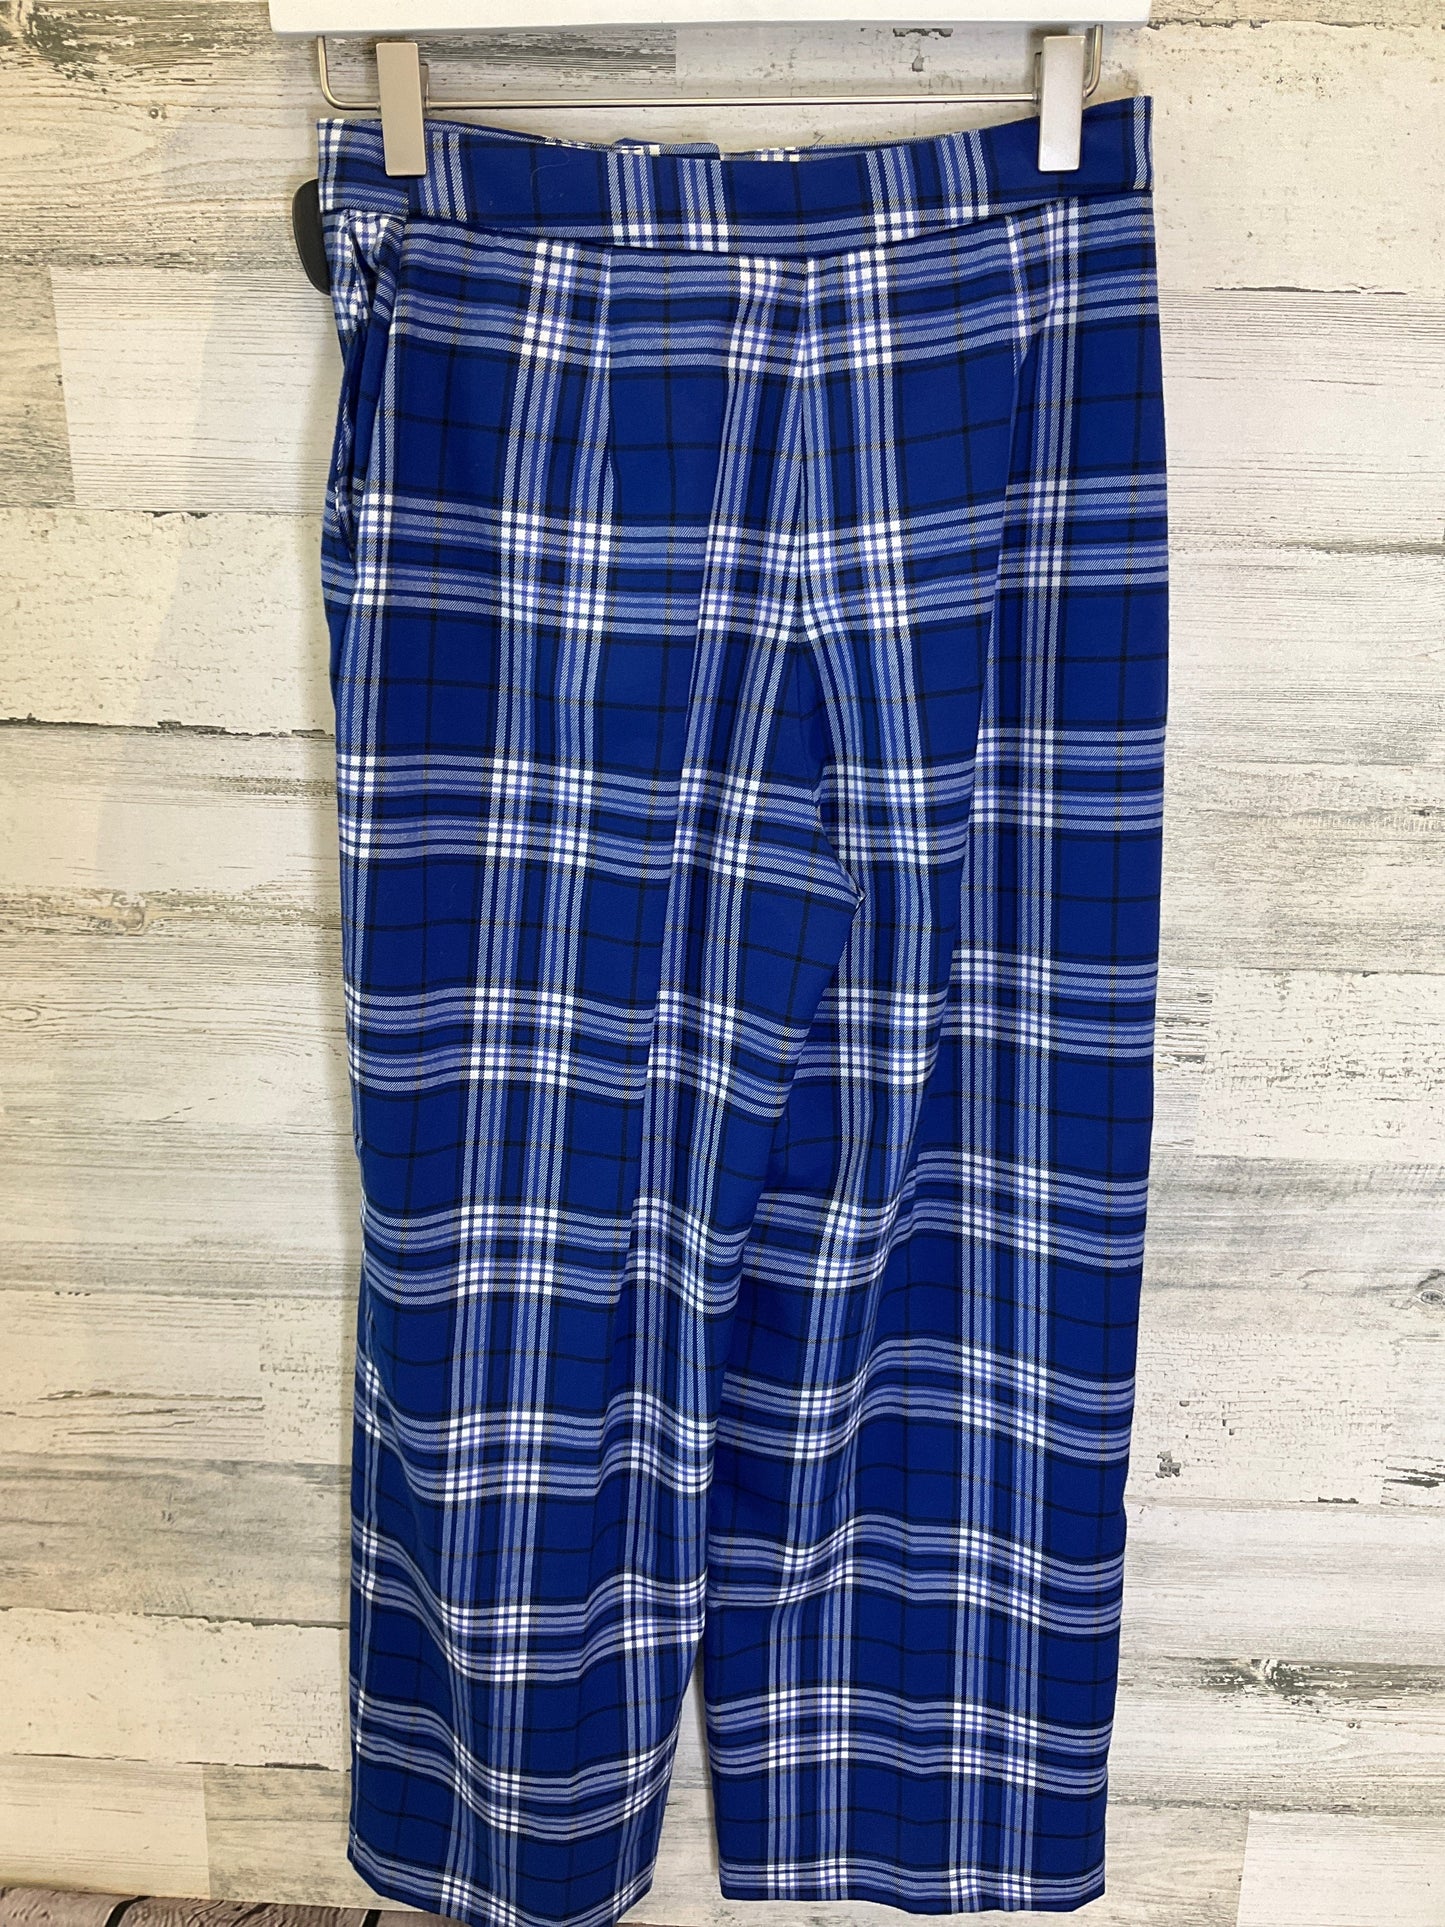 Blue & White Pants Wide Leg Urban Outfitters, Size 2